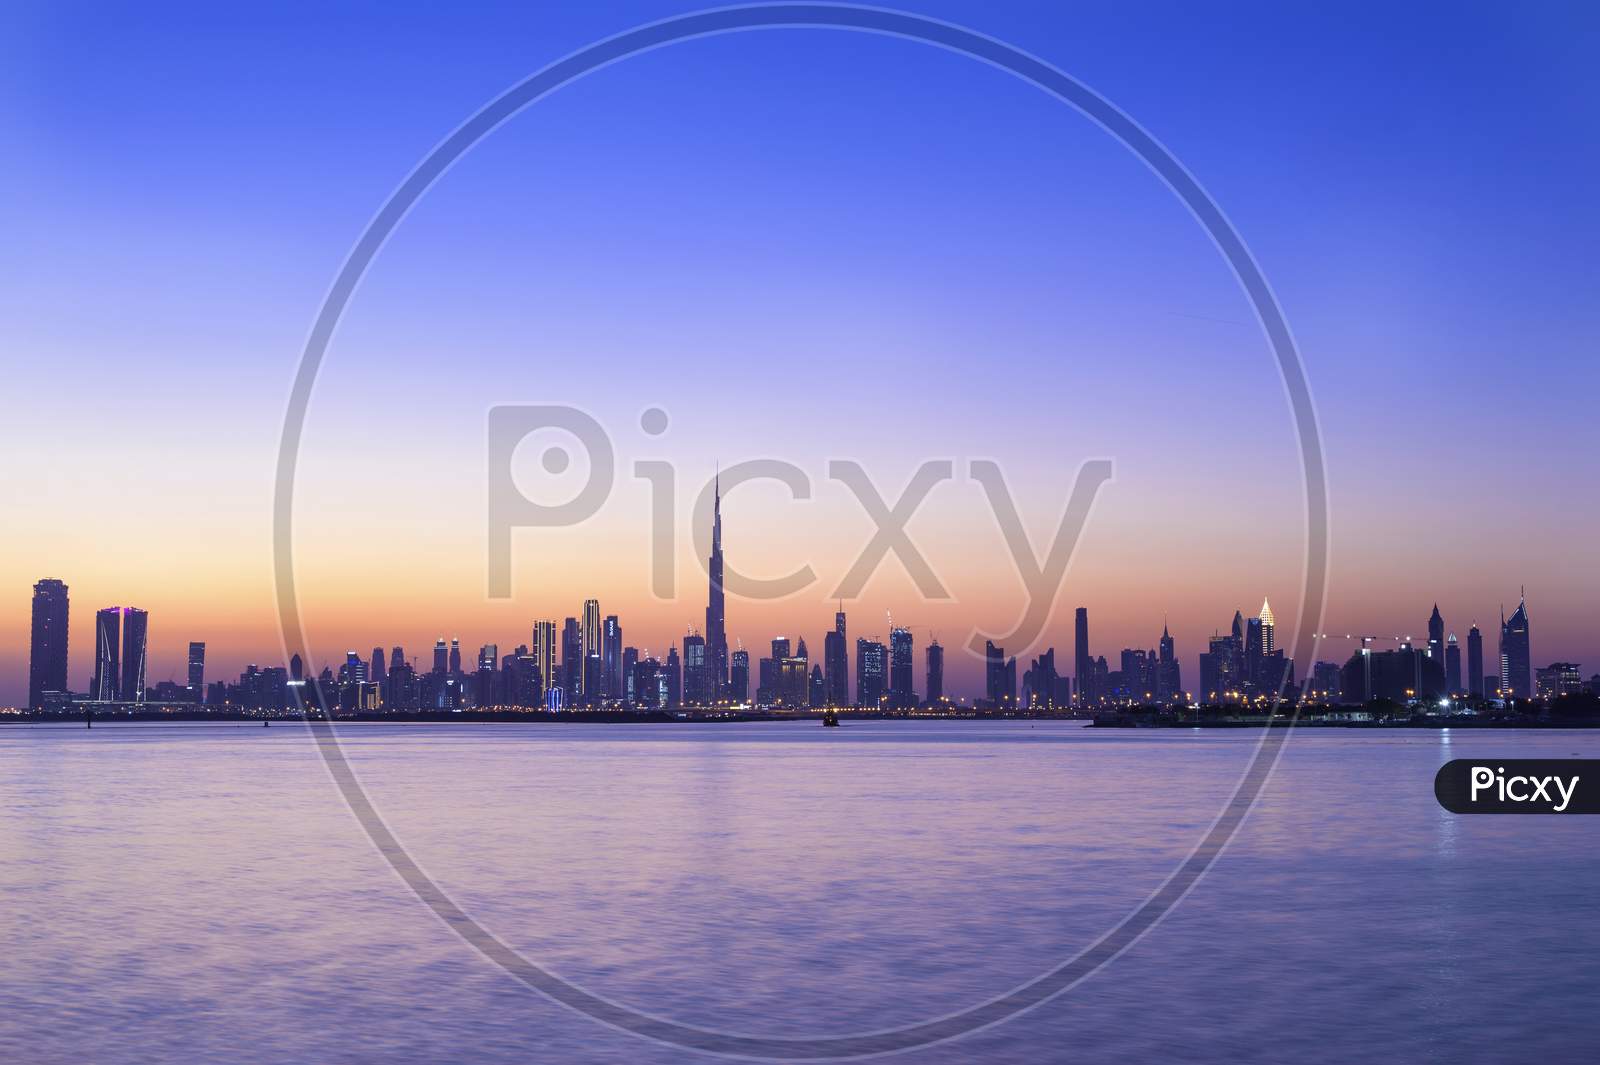 1St Dec 2020. Panoramic View Of The Dubai Skyline With Burj Khalifa And Other Sky Scrapers Captured At The Sunset With The Beautiful Blue Sky At The Dubai Creek, Ras Al Khor, Uae.